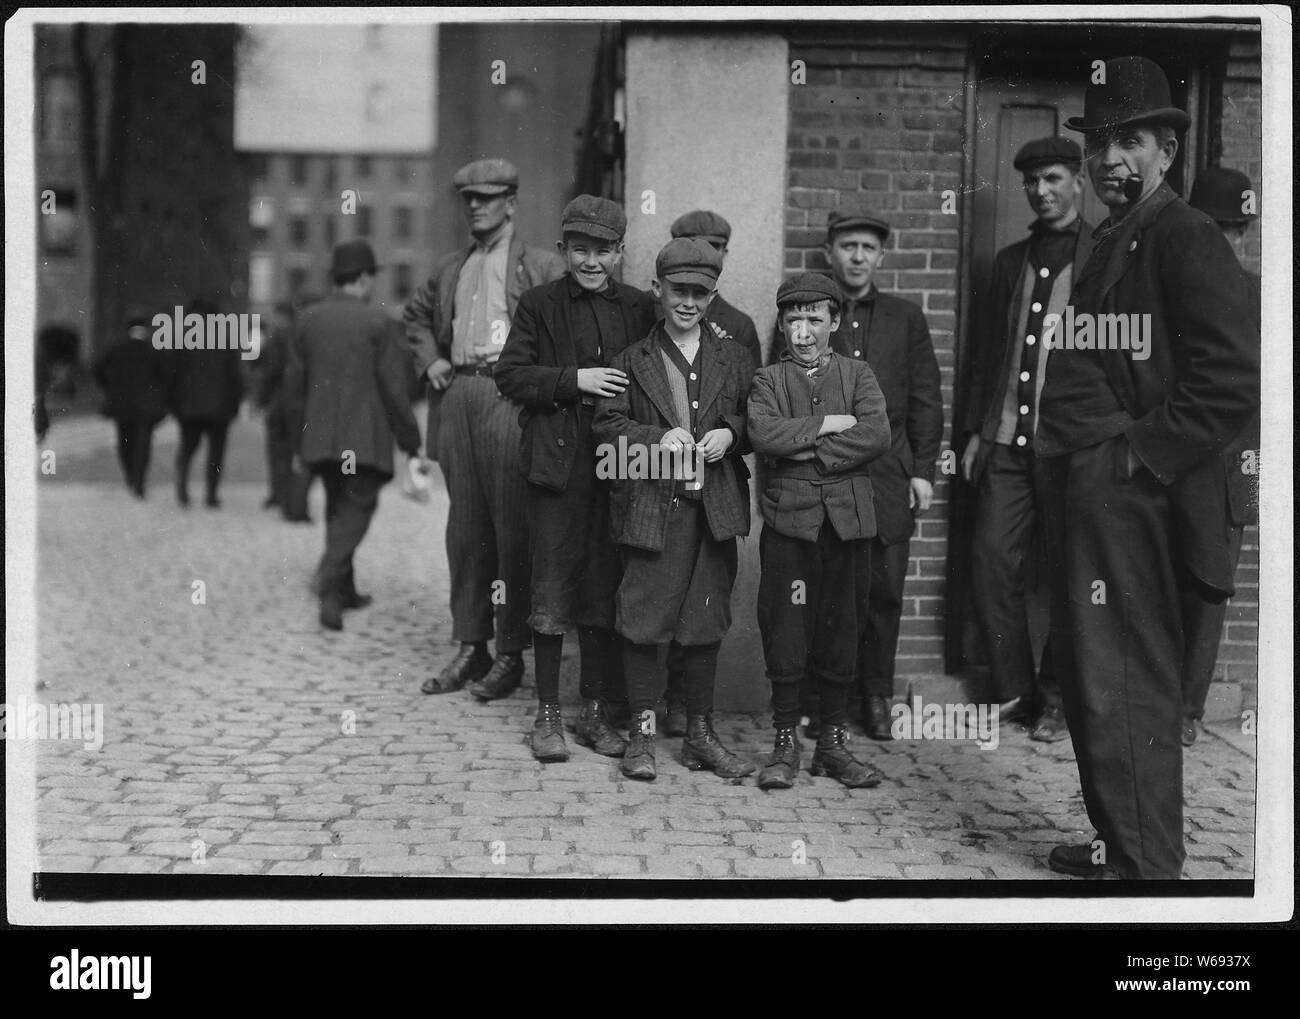 Workers in Merrimac Mill. Robert, smallest, 12 years old. Michael Keefe, next in size, about 13 or 14 years old. Cornelius Hurley, about 13 or 14. S. Framingham, Mass. Stock Photo